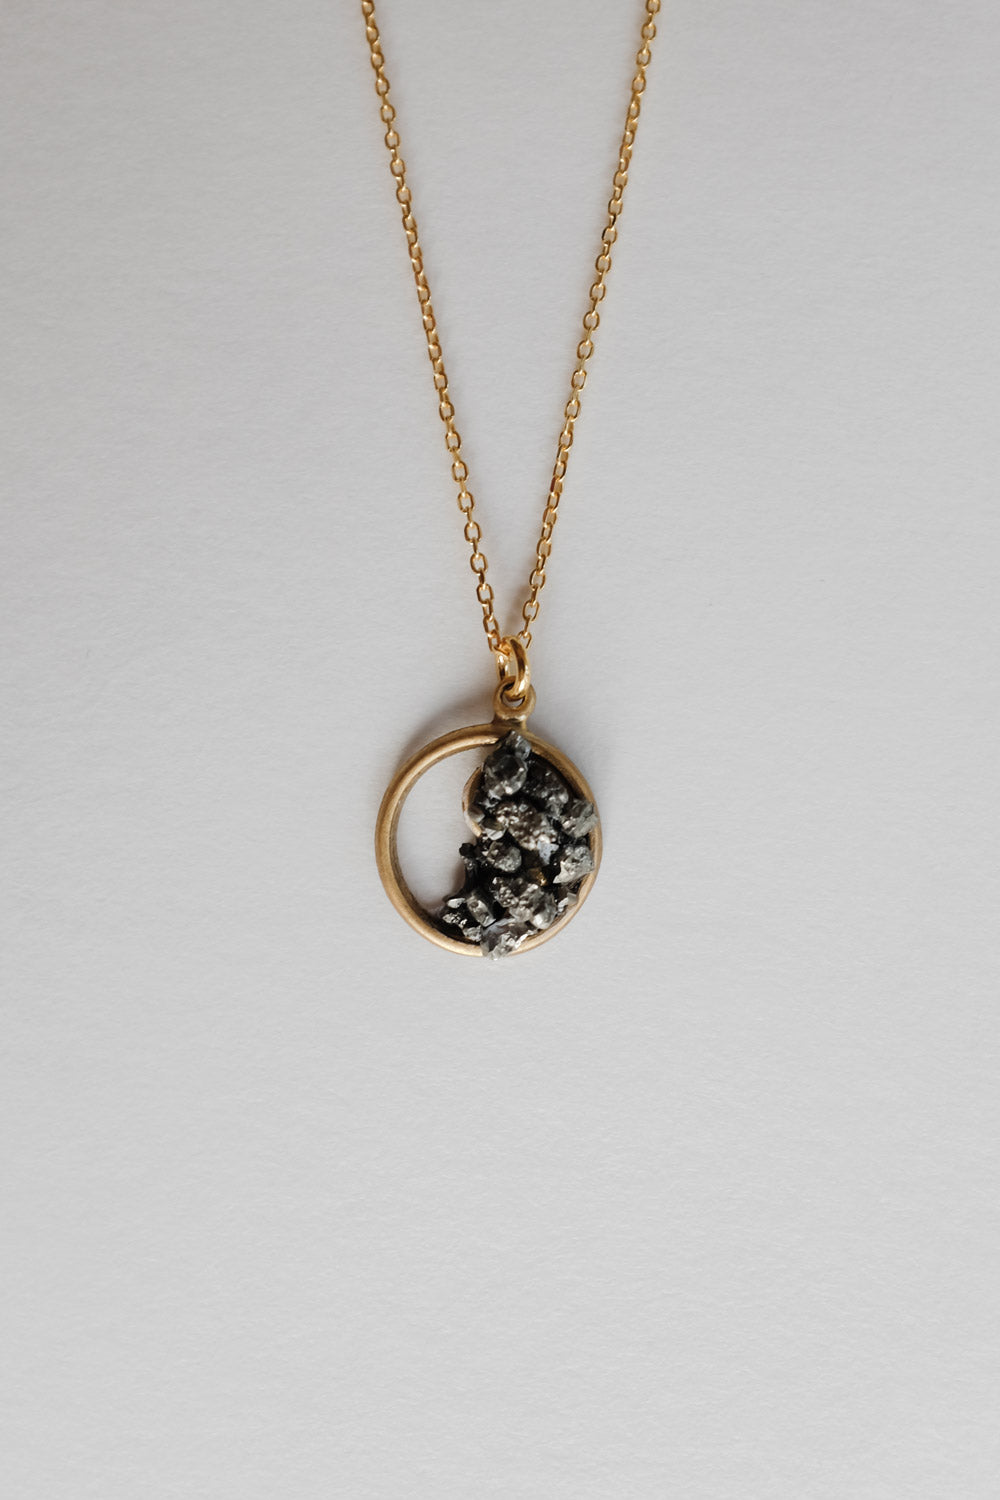 0001_YIN YANG PYRITE NECKLACE GOLD PLATED 925